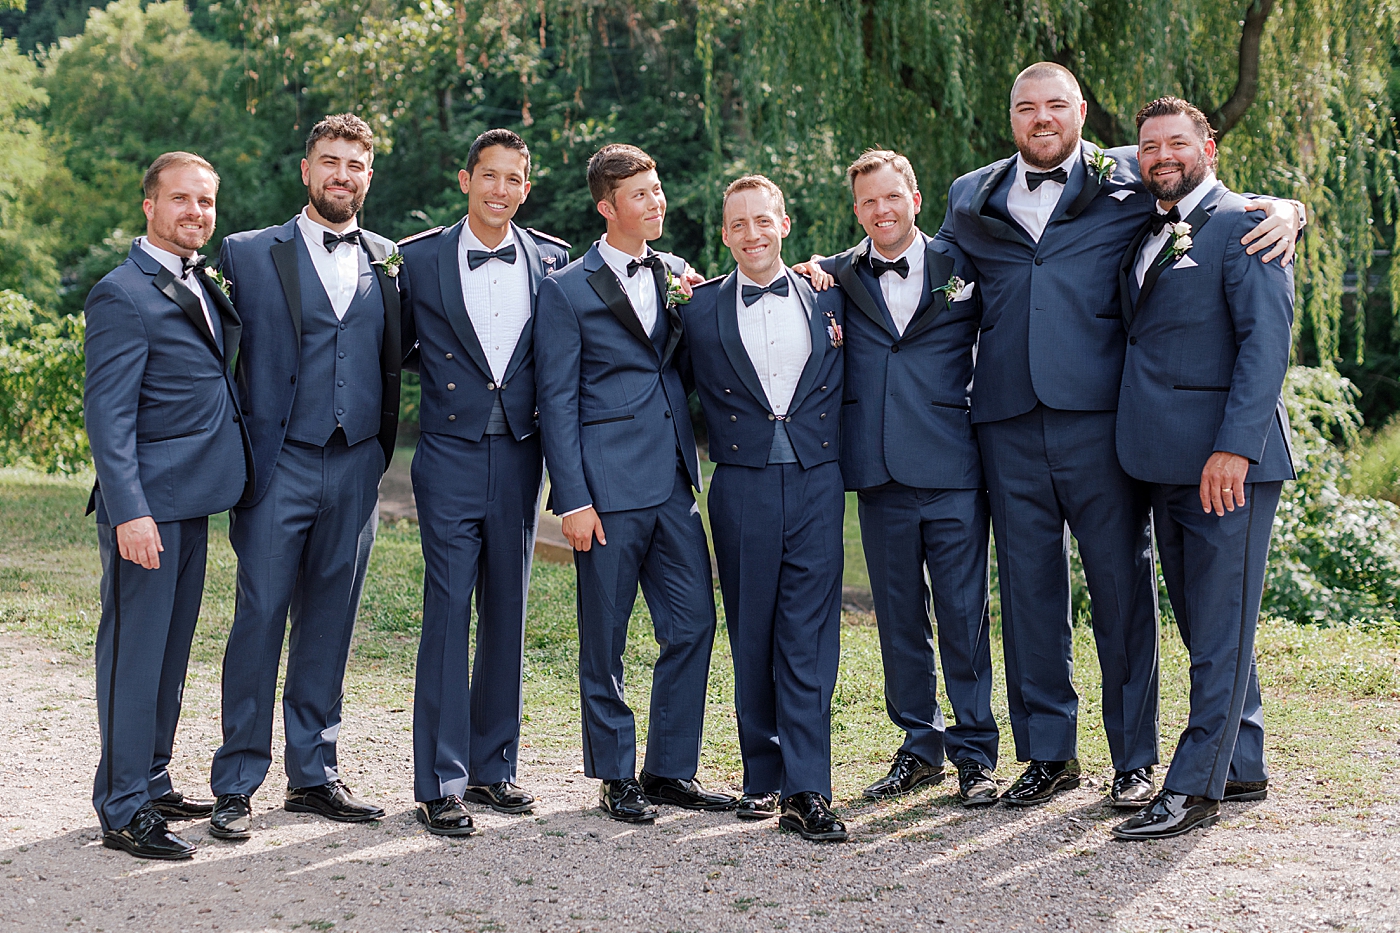 Groomsmen all in a line | Image by Hope Helmuth Photography